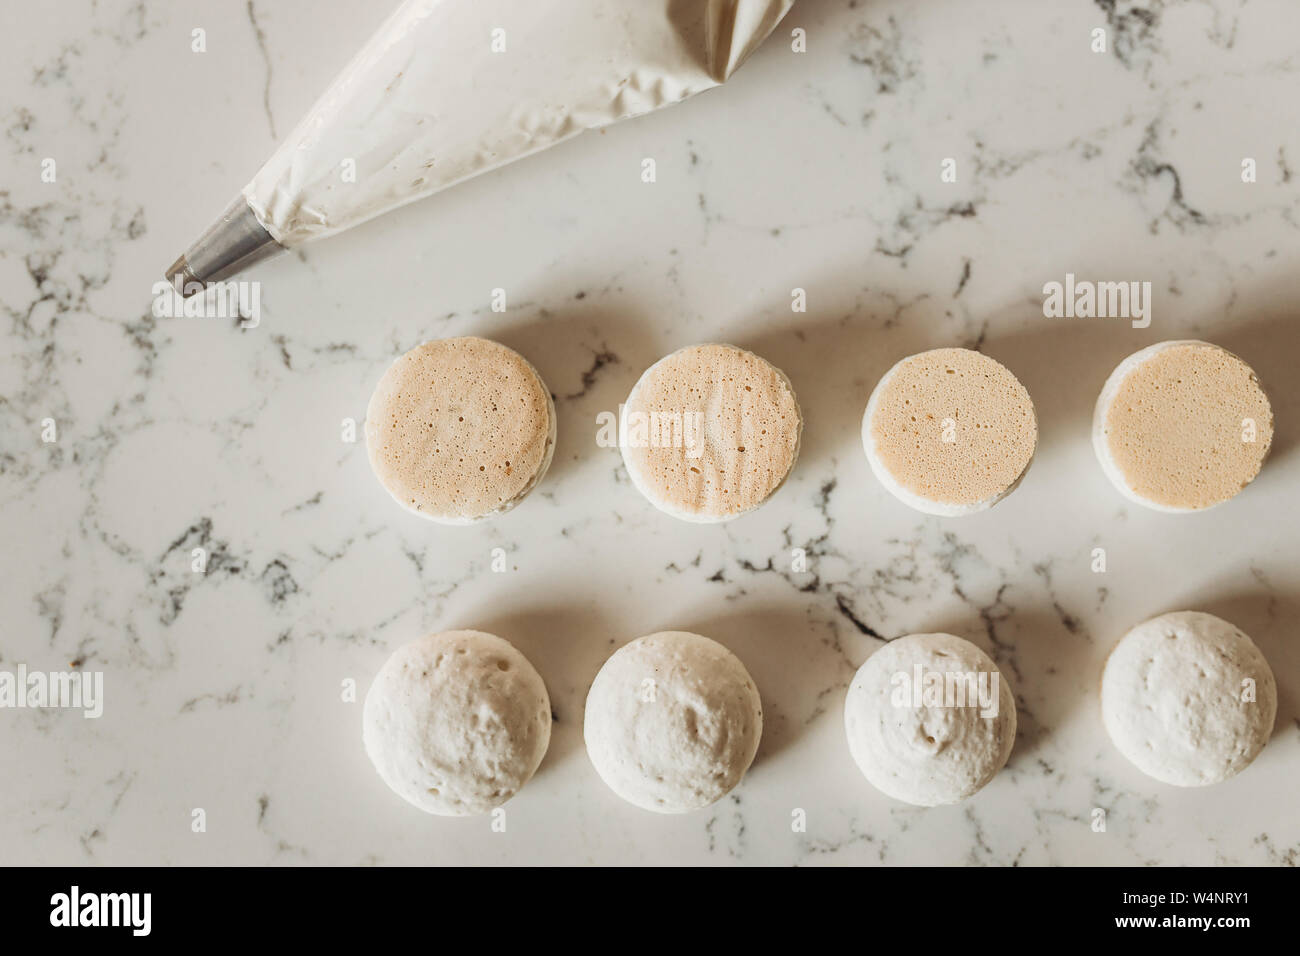 Macaron cookie shells arranged with piping bag full of buttercream Stock Photo